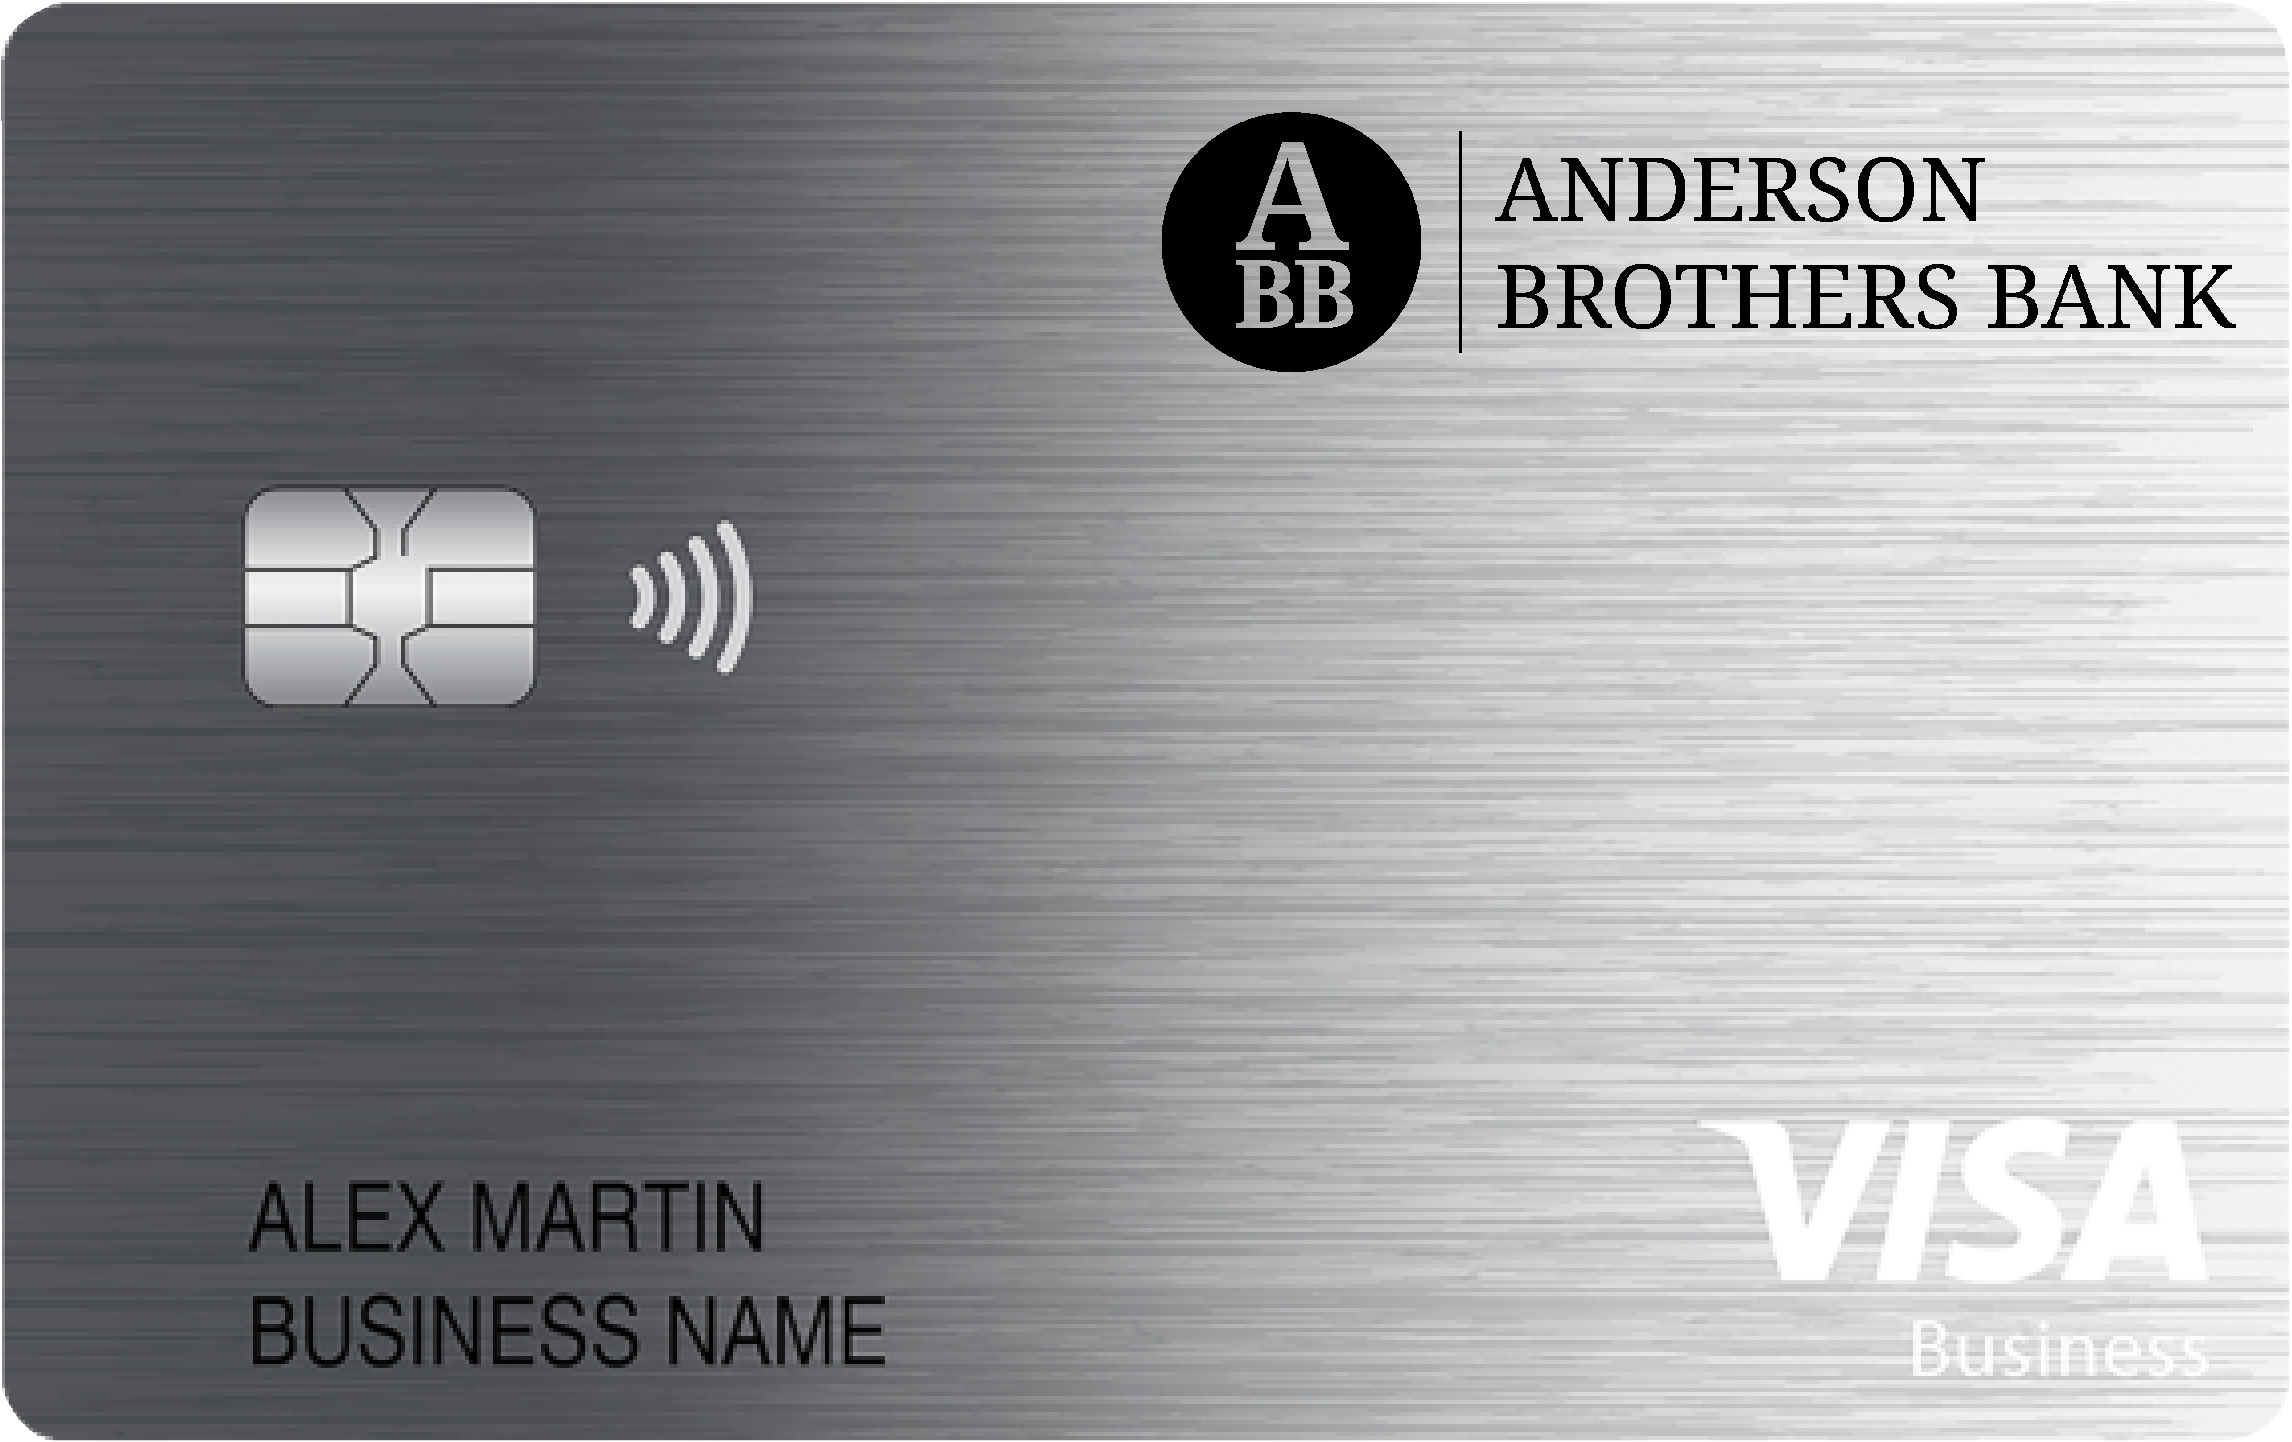 Anderson Brothers Bank Business Cash Preferred Card